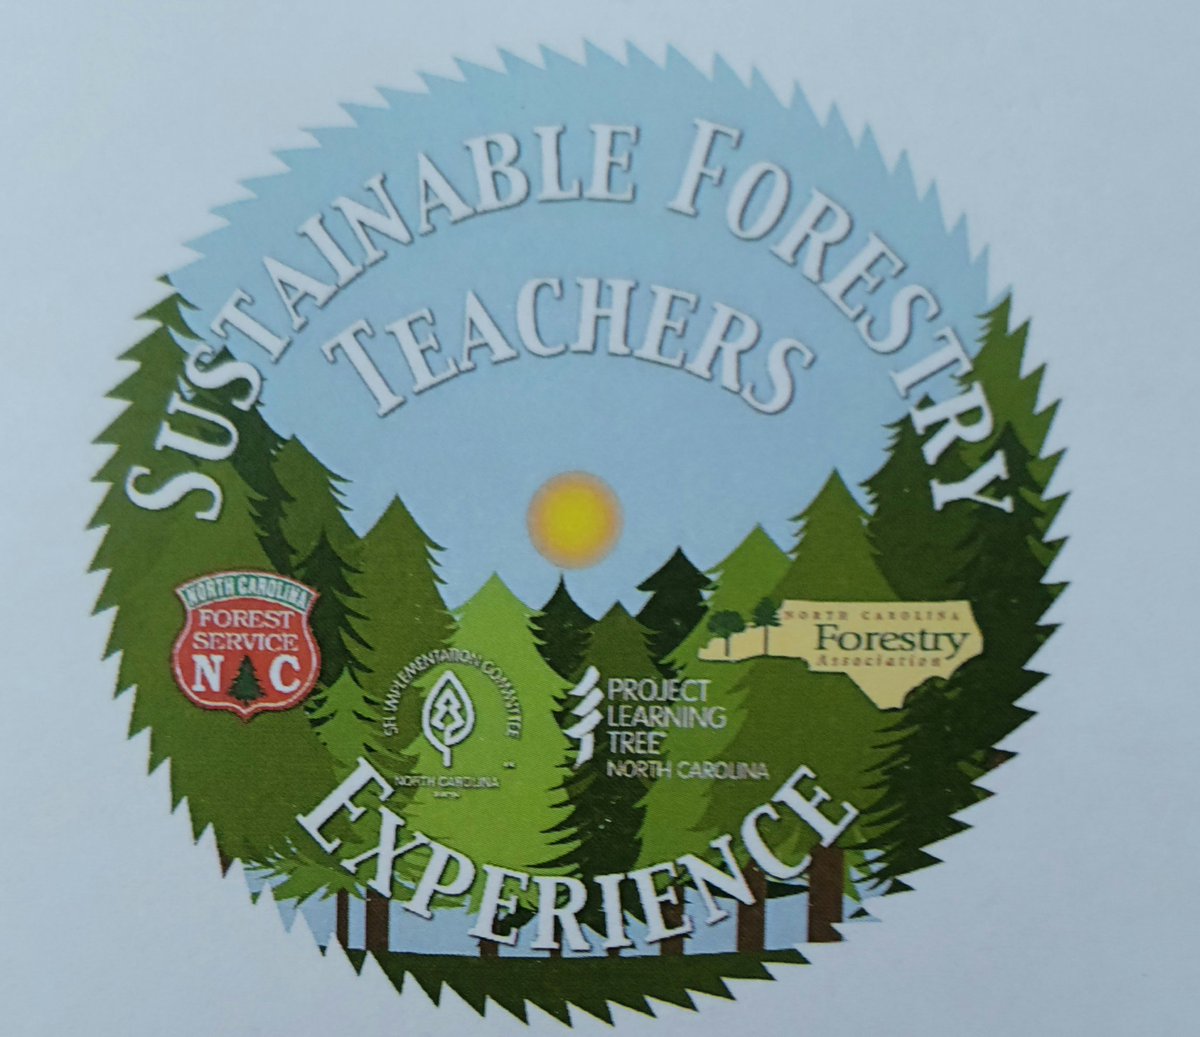 Lifelong Learning continues this week. Participating in the Sustainable Forestry Teachers Experience. Thank you @NCForestryAssoc @PLTinNC @ncforestservice Excited to be learning in the forests of NC. @WileyMS @WSFCS_Science @Wiley6GrAP